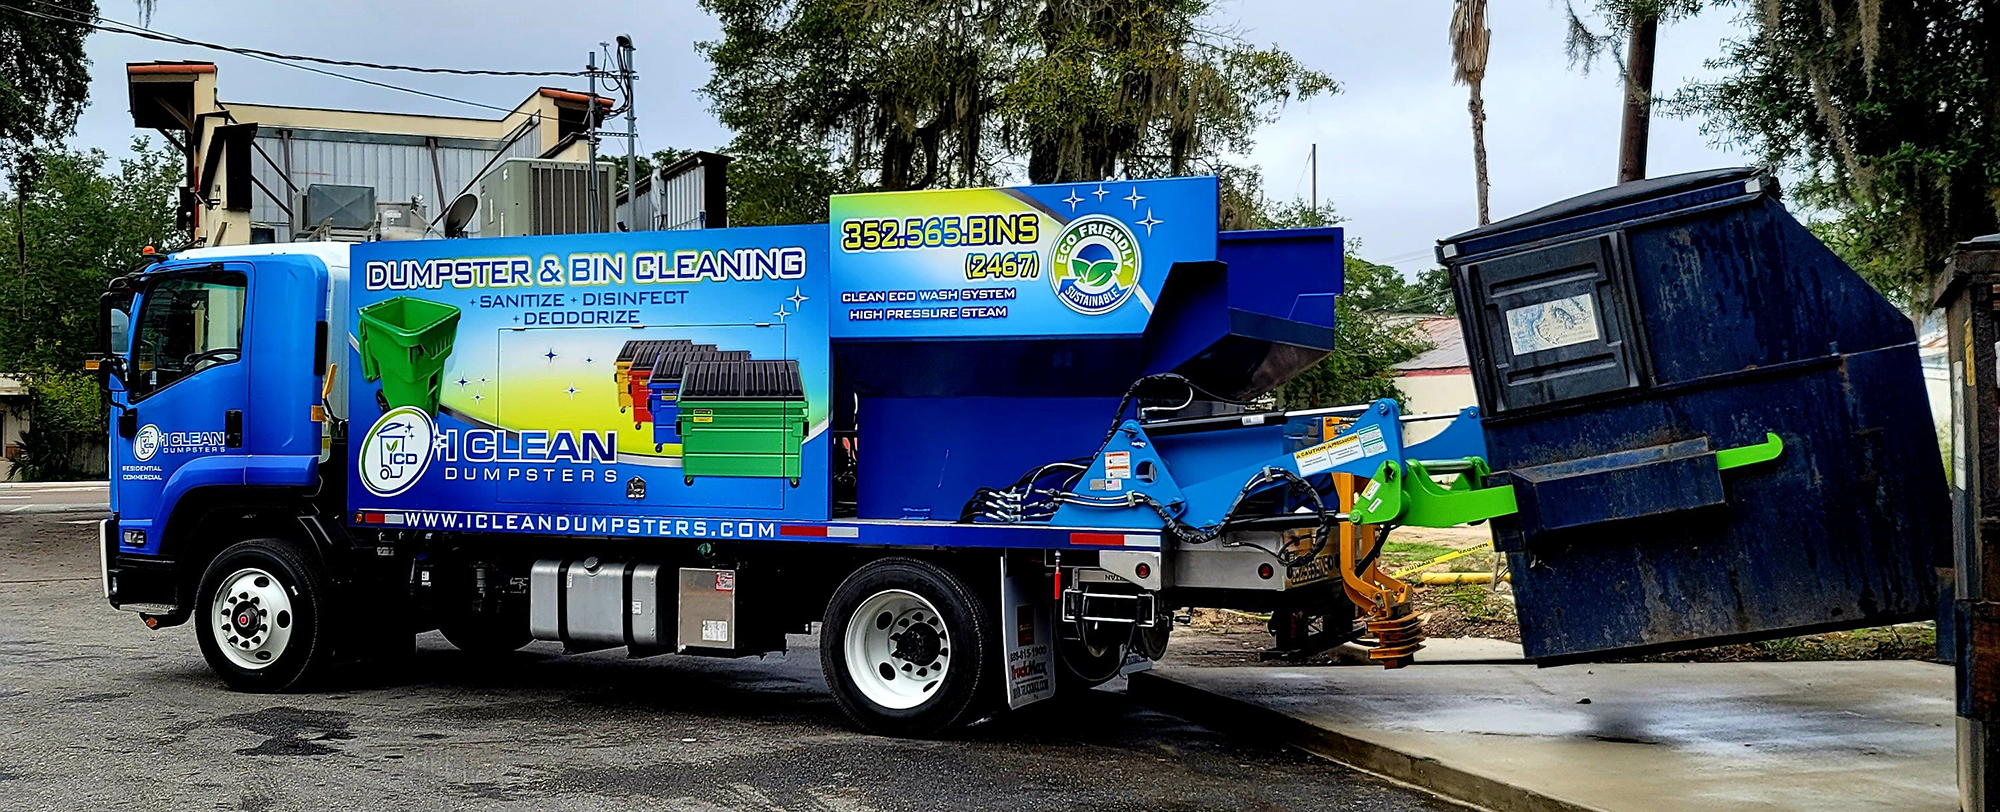 I CLEAN DUMPSTERS BIN CLEANING SERVICES